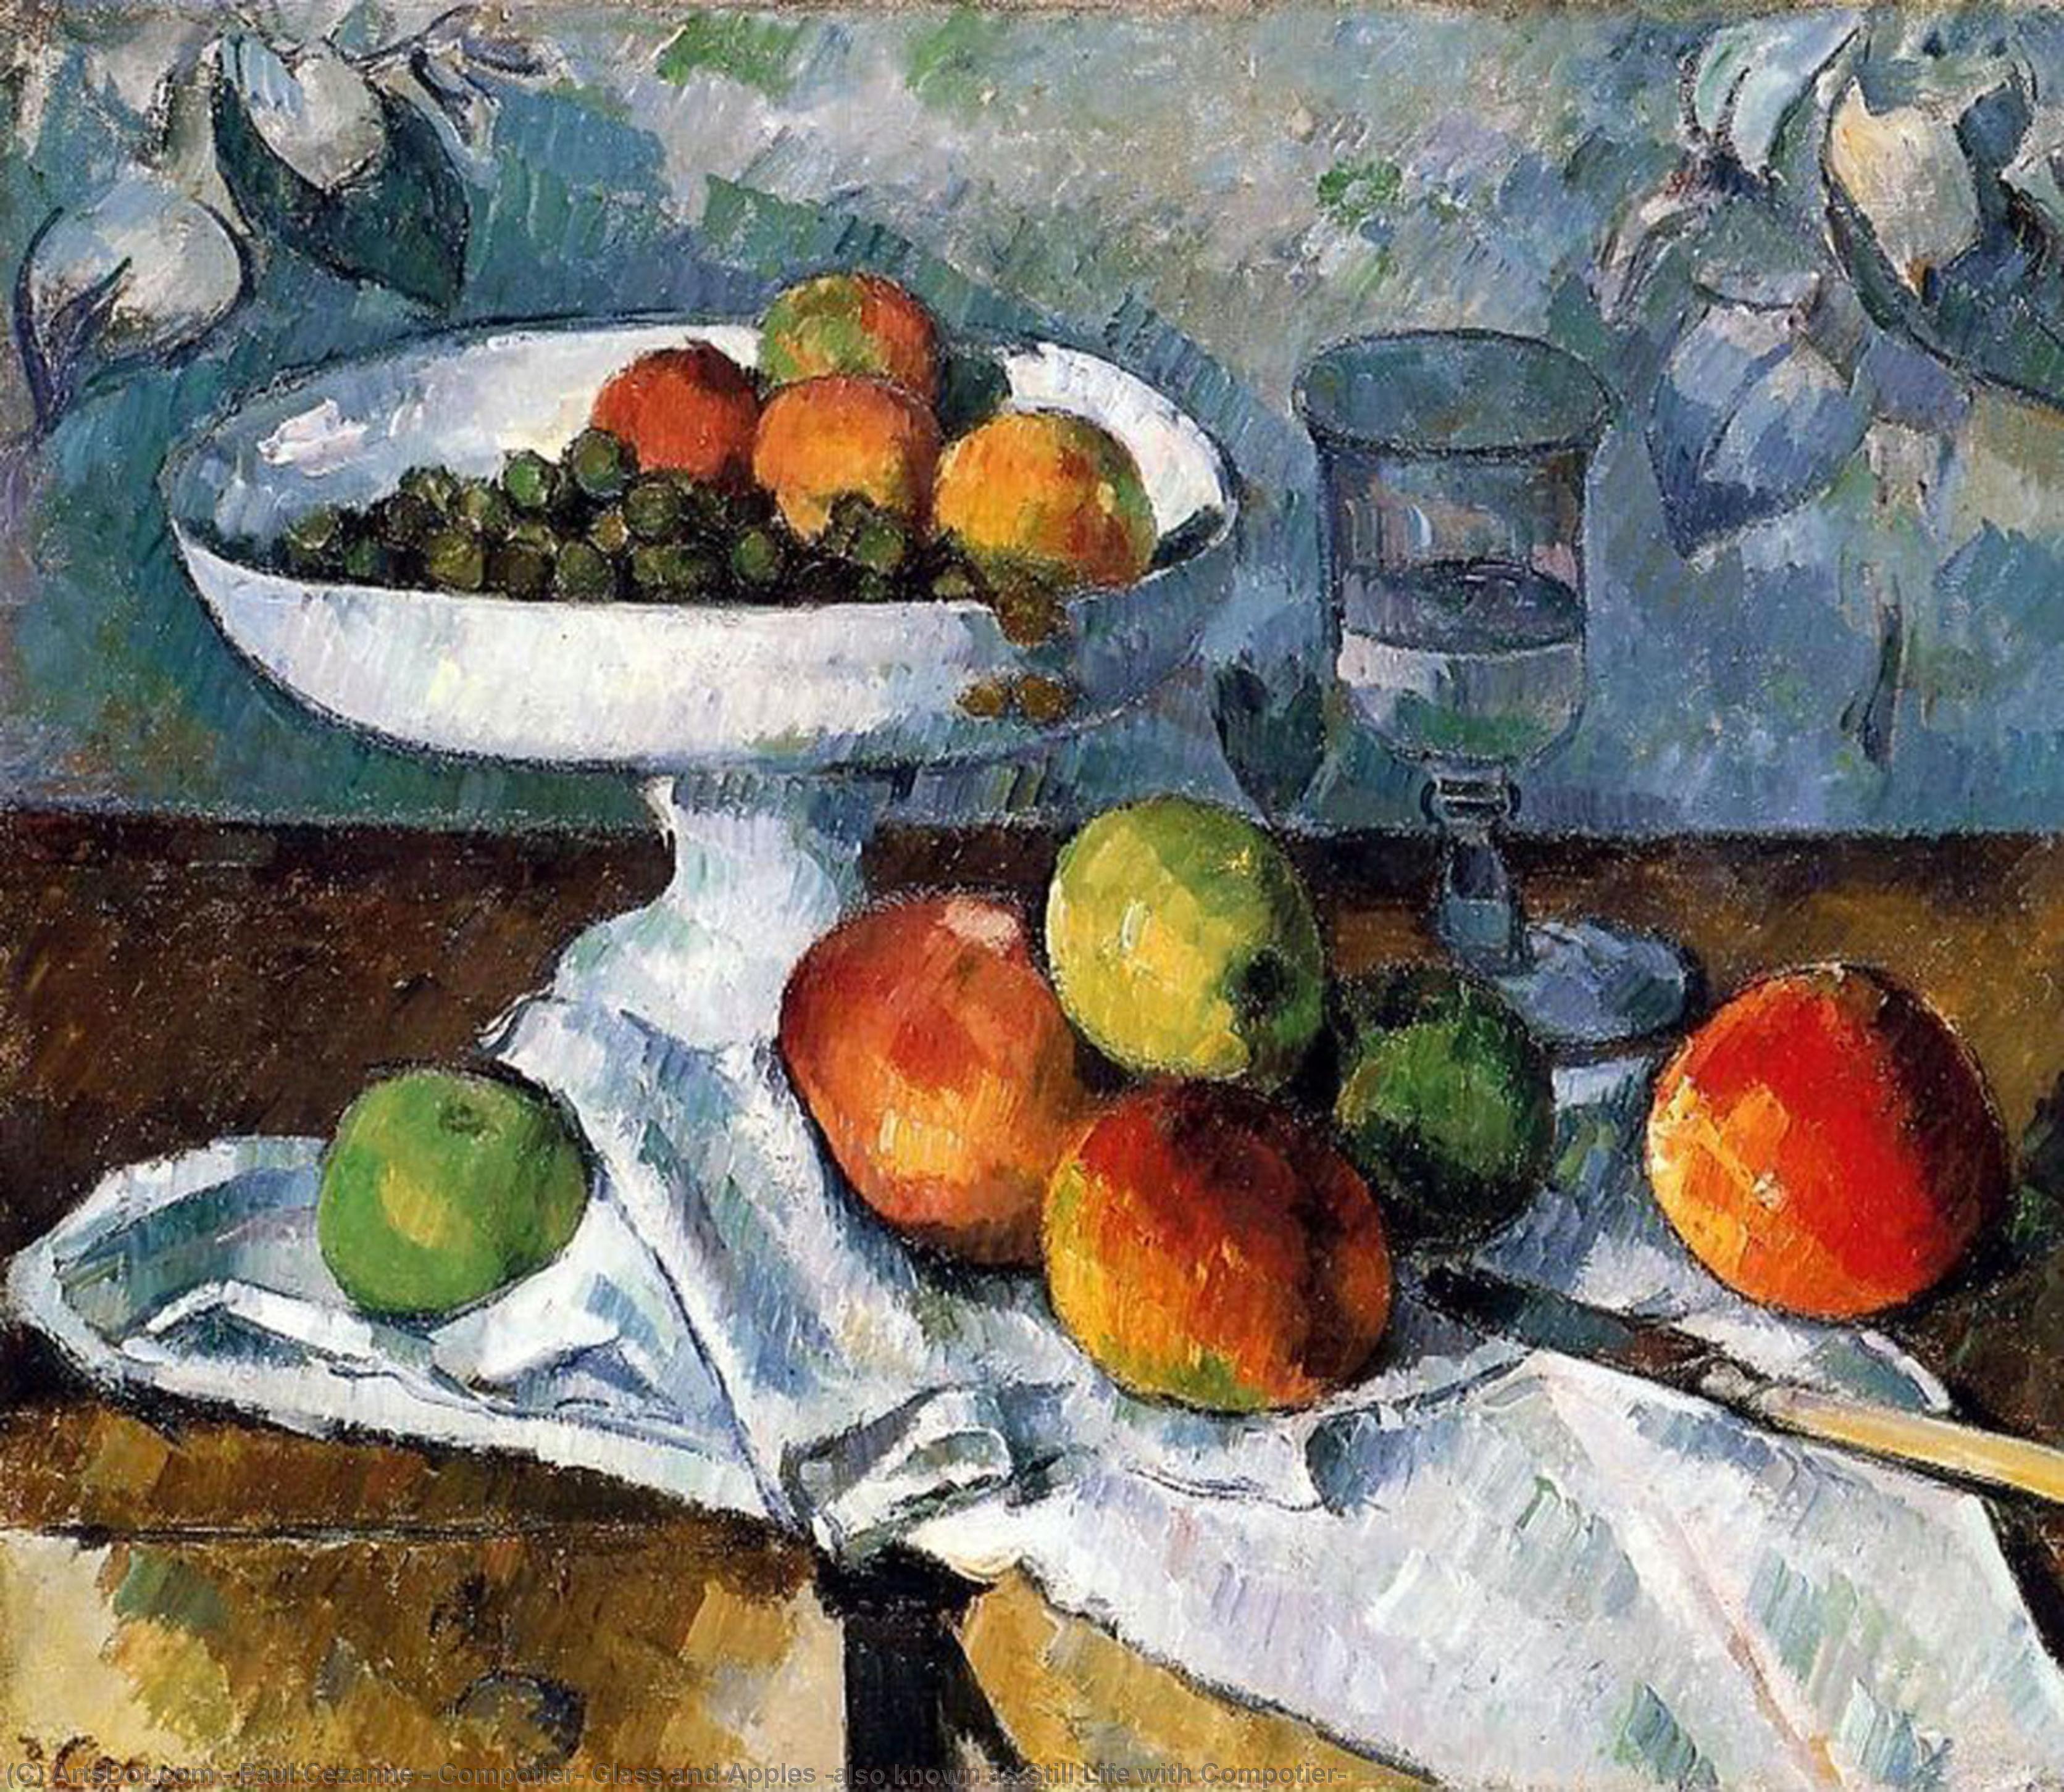 WikiOO.org - Güzel Sanatlar Ansiklopedisi - Resim, Resimler Paul Cezanne - Compotier, Glass and Apples (also known as Still Life with Compotier)